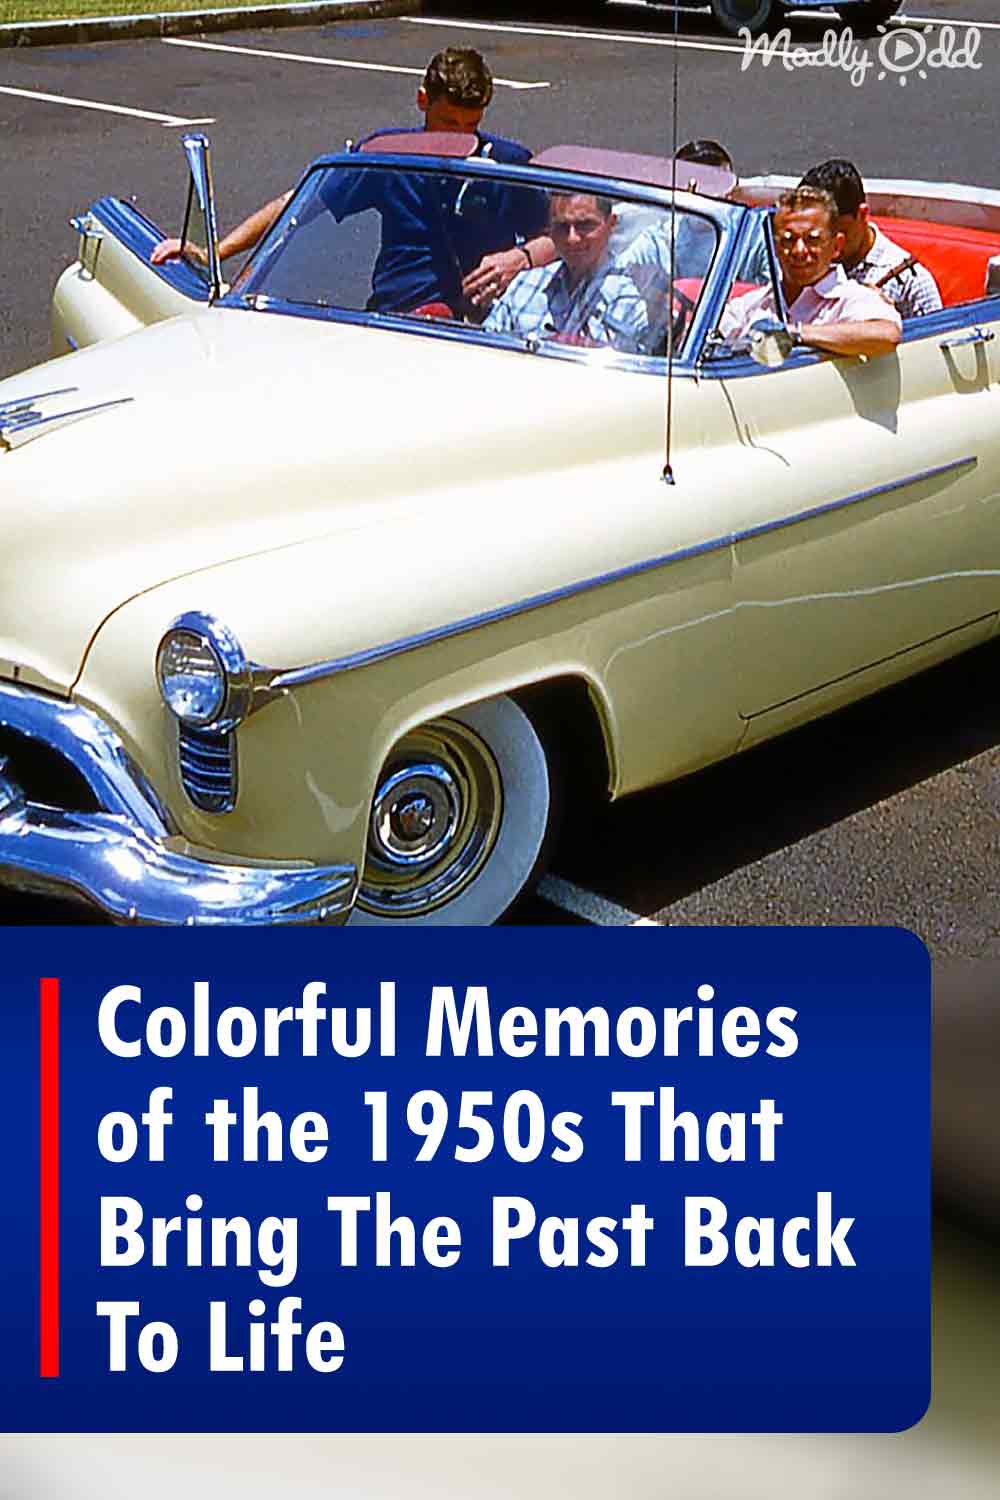 Colorful Memories of the 1950s That Bring The Past Back To Life